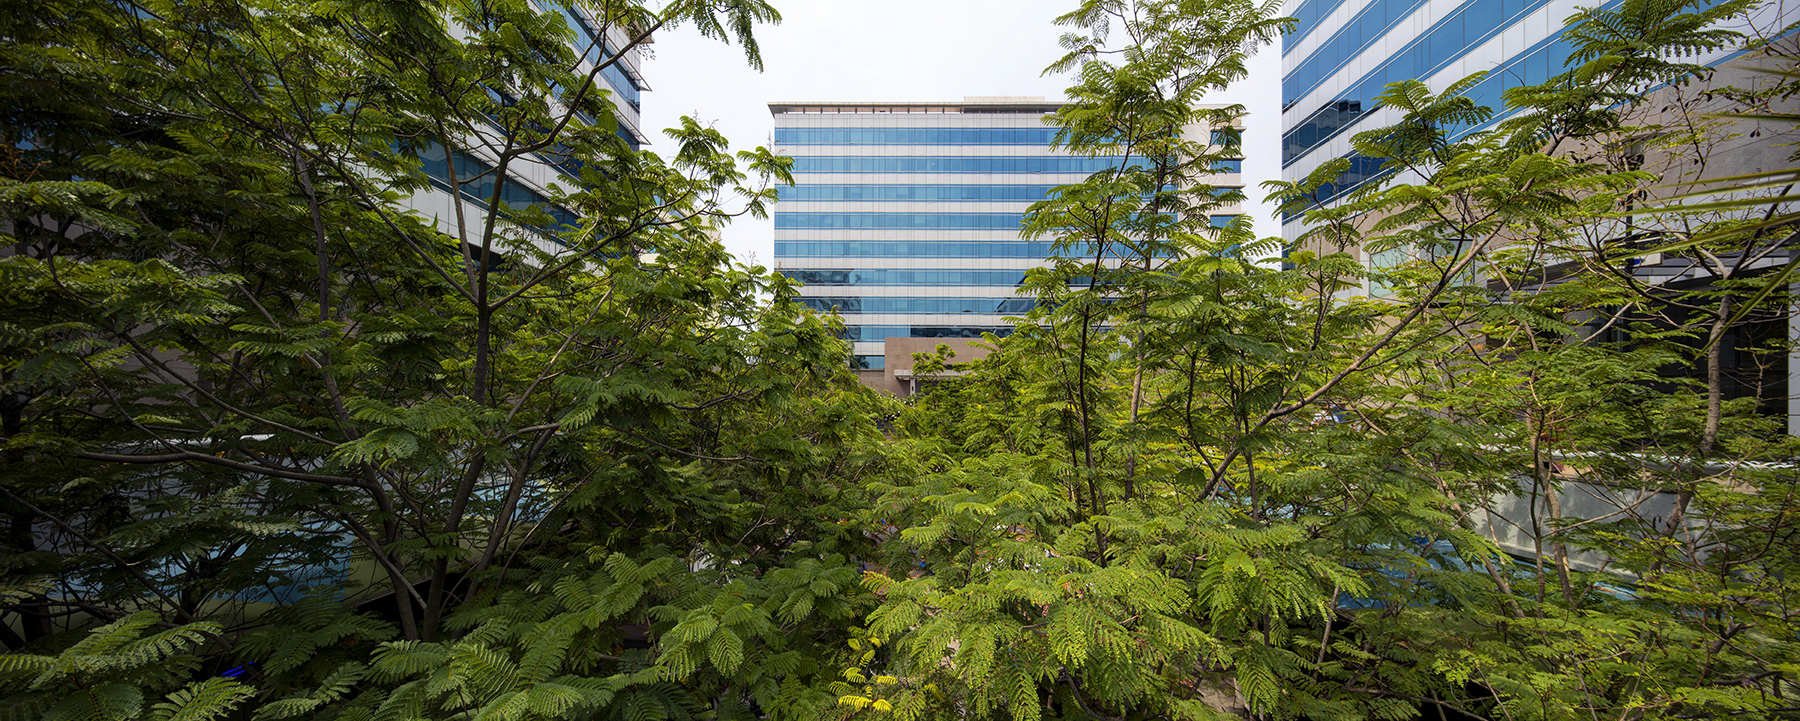 View of an office tower through the trees